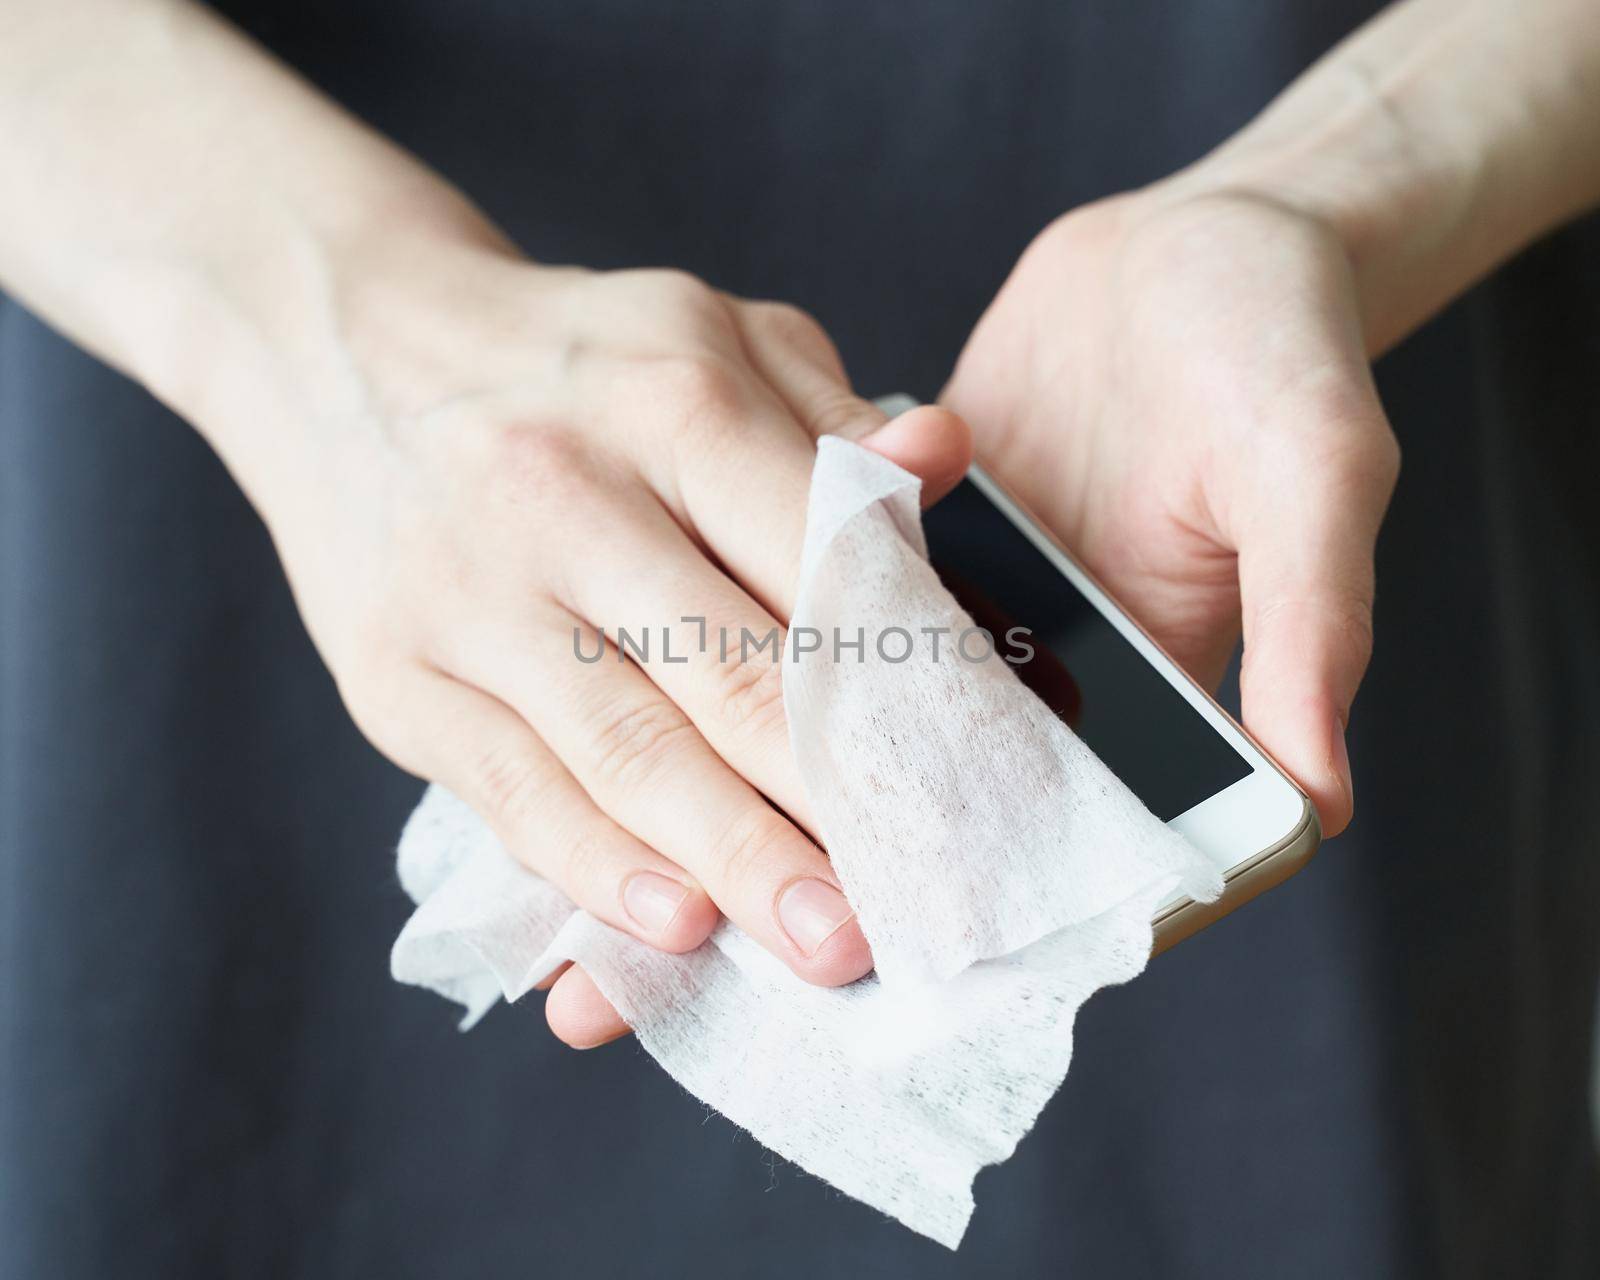 Woman wash cell phone with wet wipes, to prevent illness Novel coronavirus 2019-nCoV after public place. Antiseptic, Hygiene and Healthcare concept